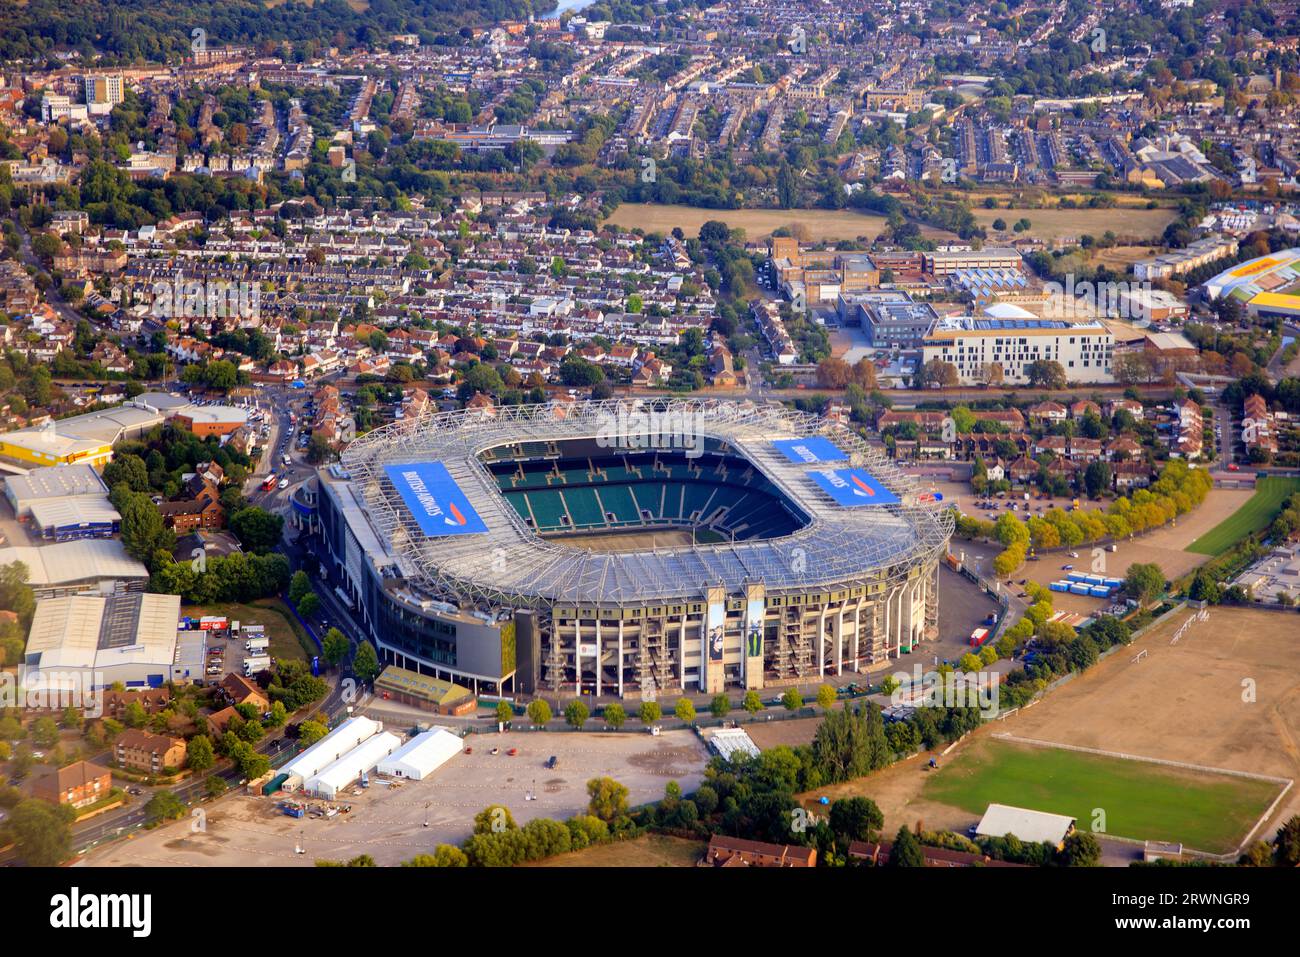 Twickenham Stadium in Twickenham, south-west London, is a rugby union stadium owned by the Rugby Football Union (RFU). The England national rugby unio Stock Photo